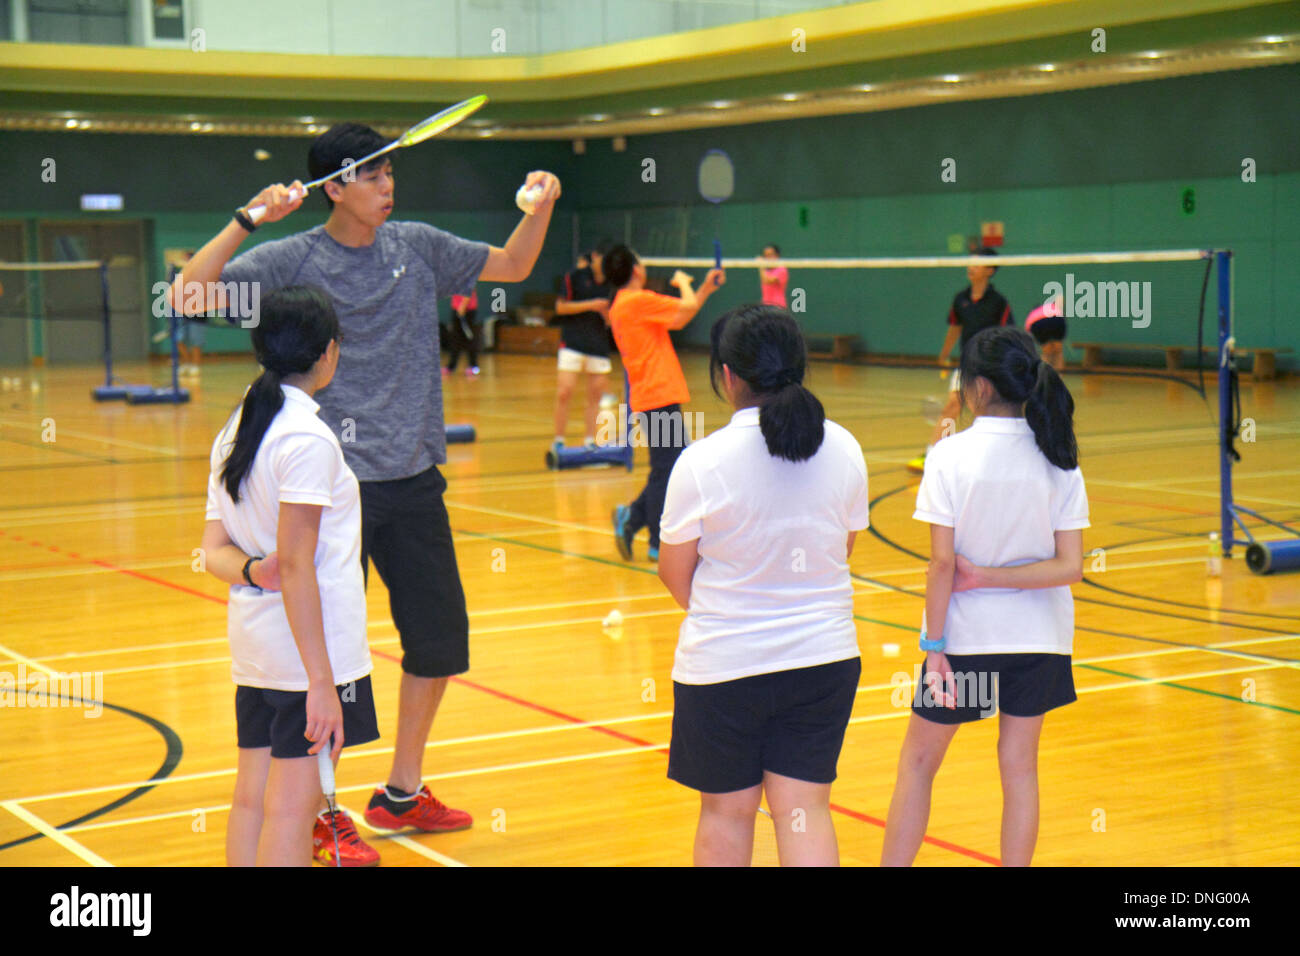 Hong Kong China,HK,Chinese,Island,Central,Hong Kong Park Sports Centre,center,badminton courts,indoor,gymnasium,Asian girl girls,youngster,female kids Stock Photo